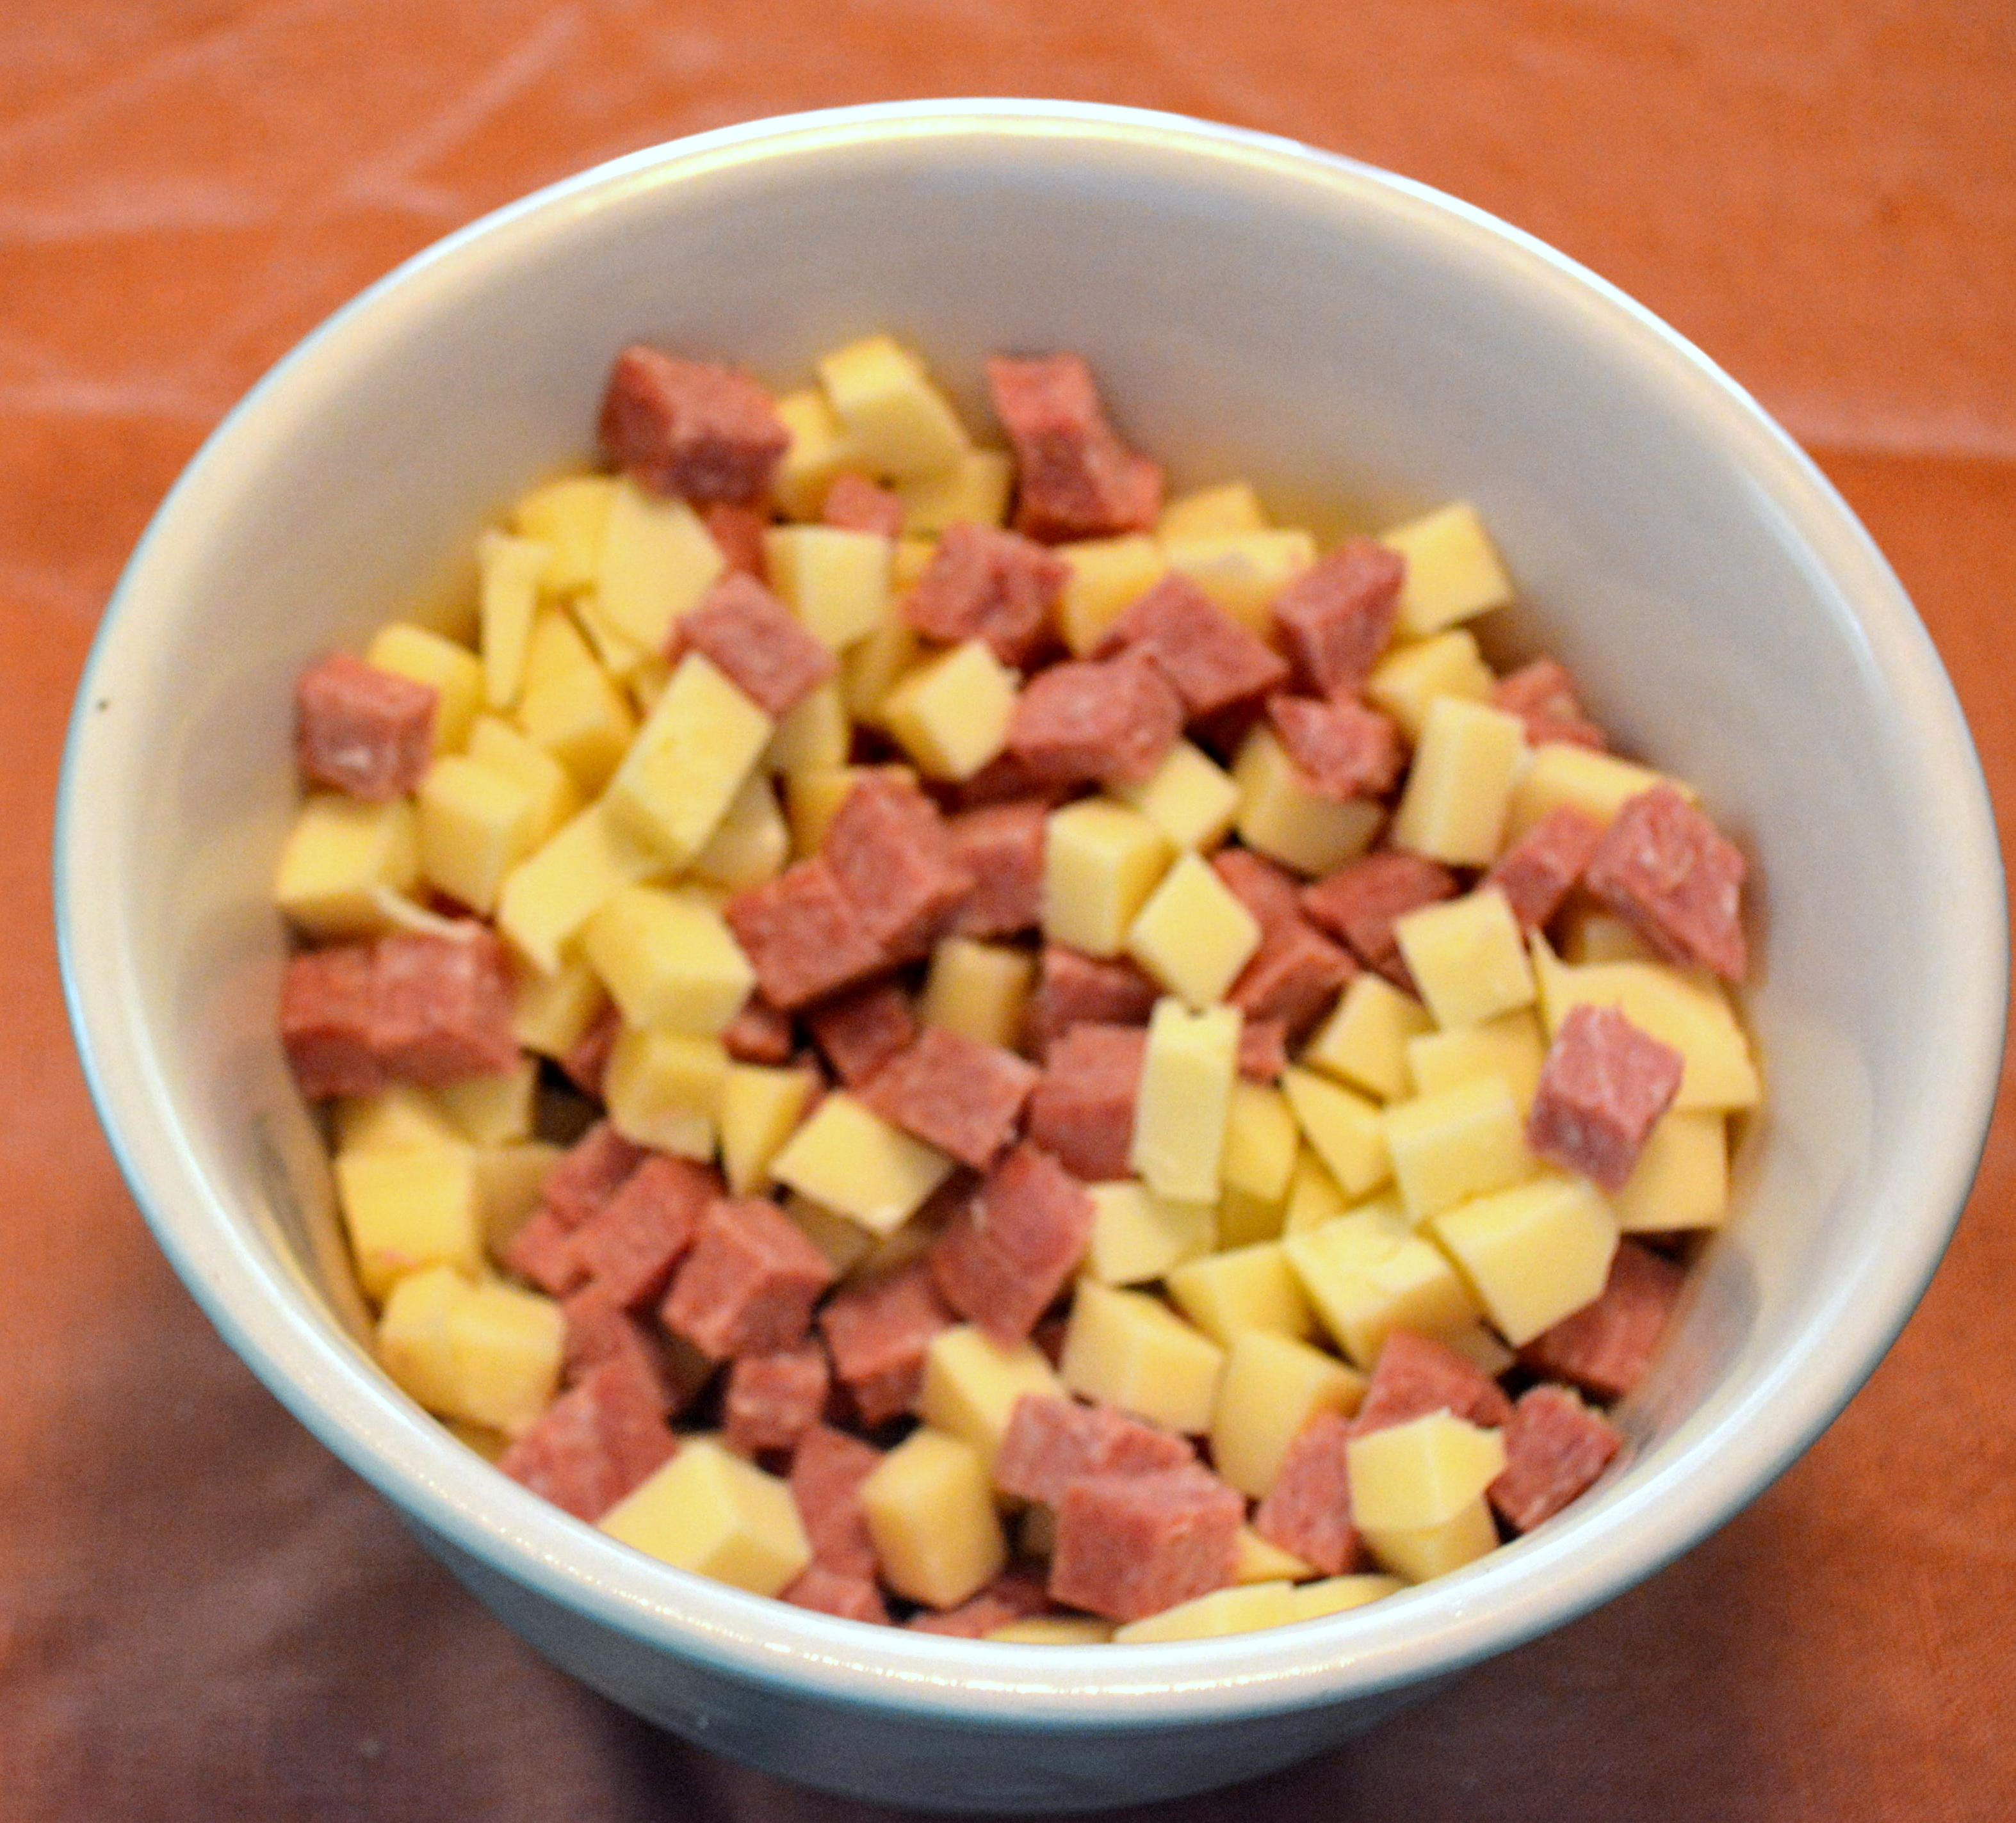 Salami and cheese in squares photo